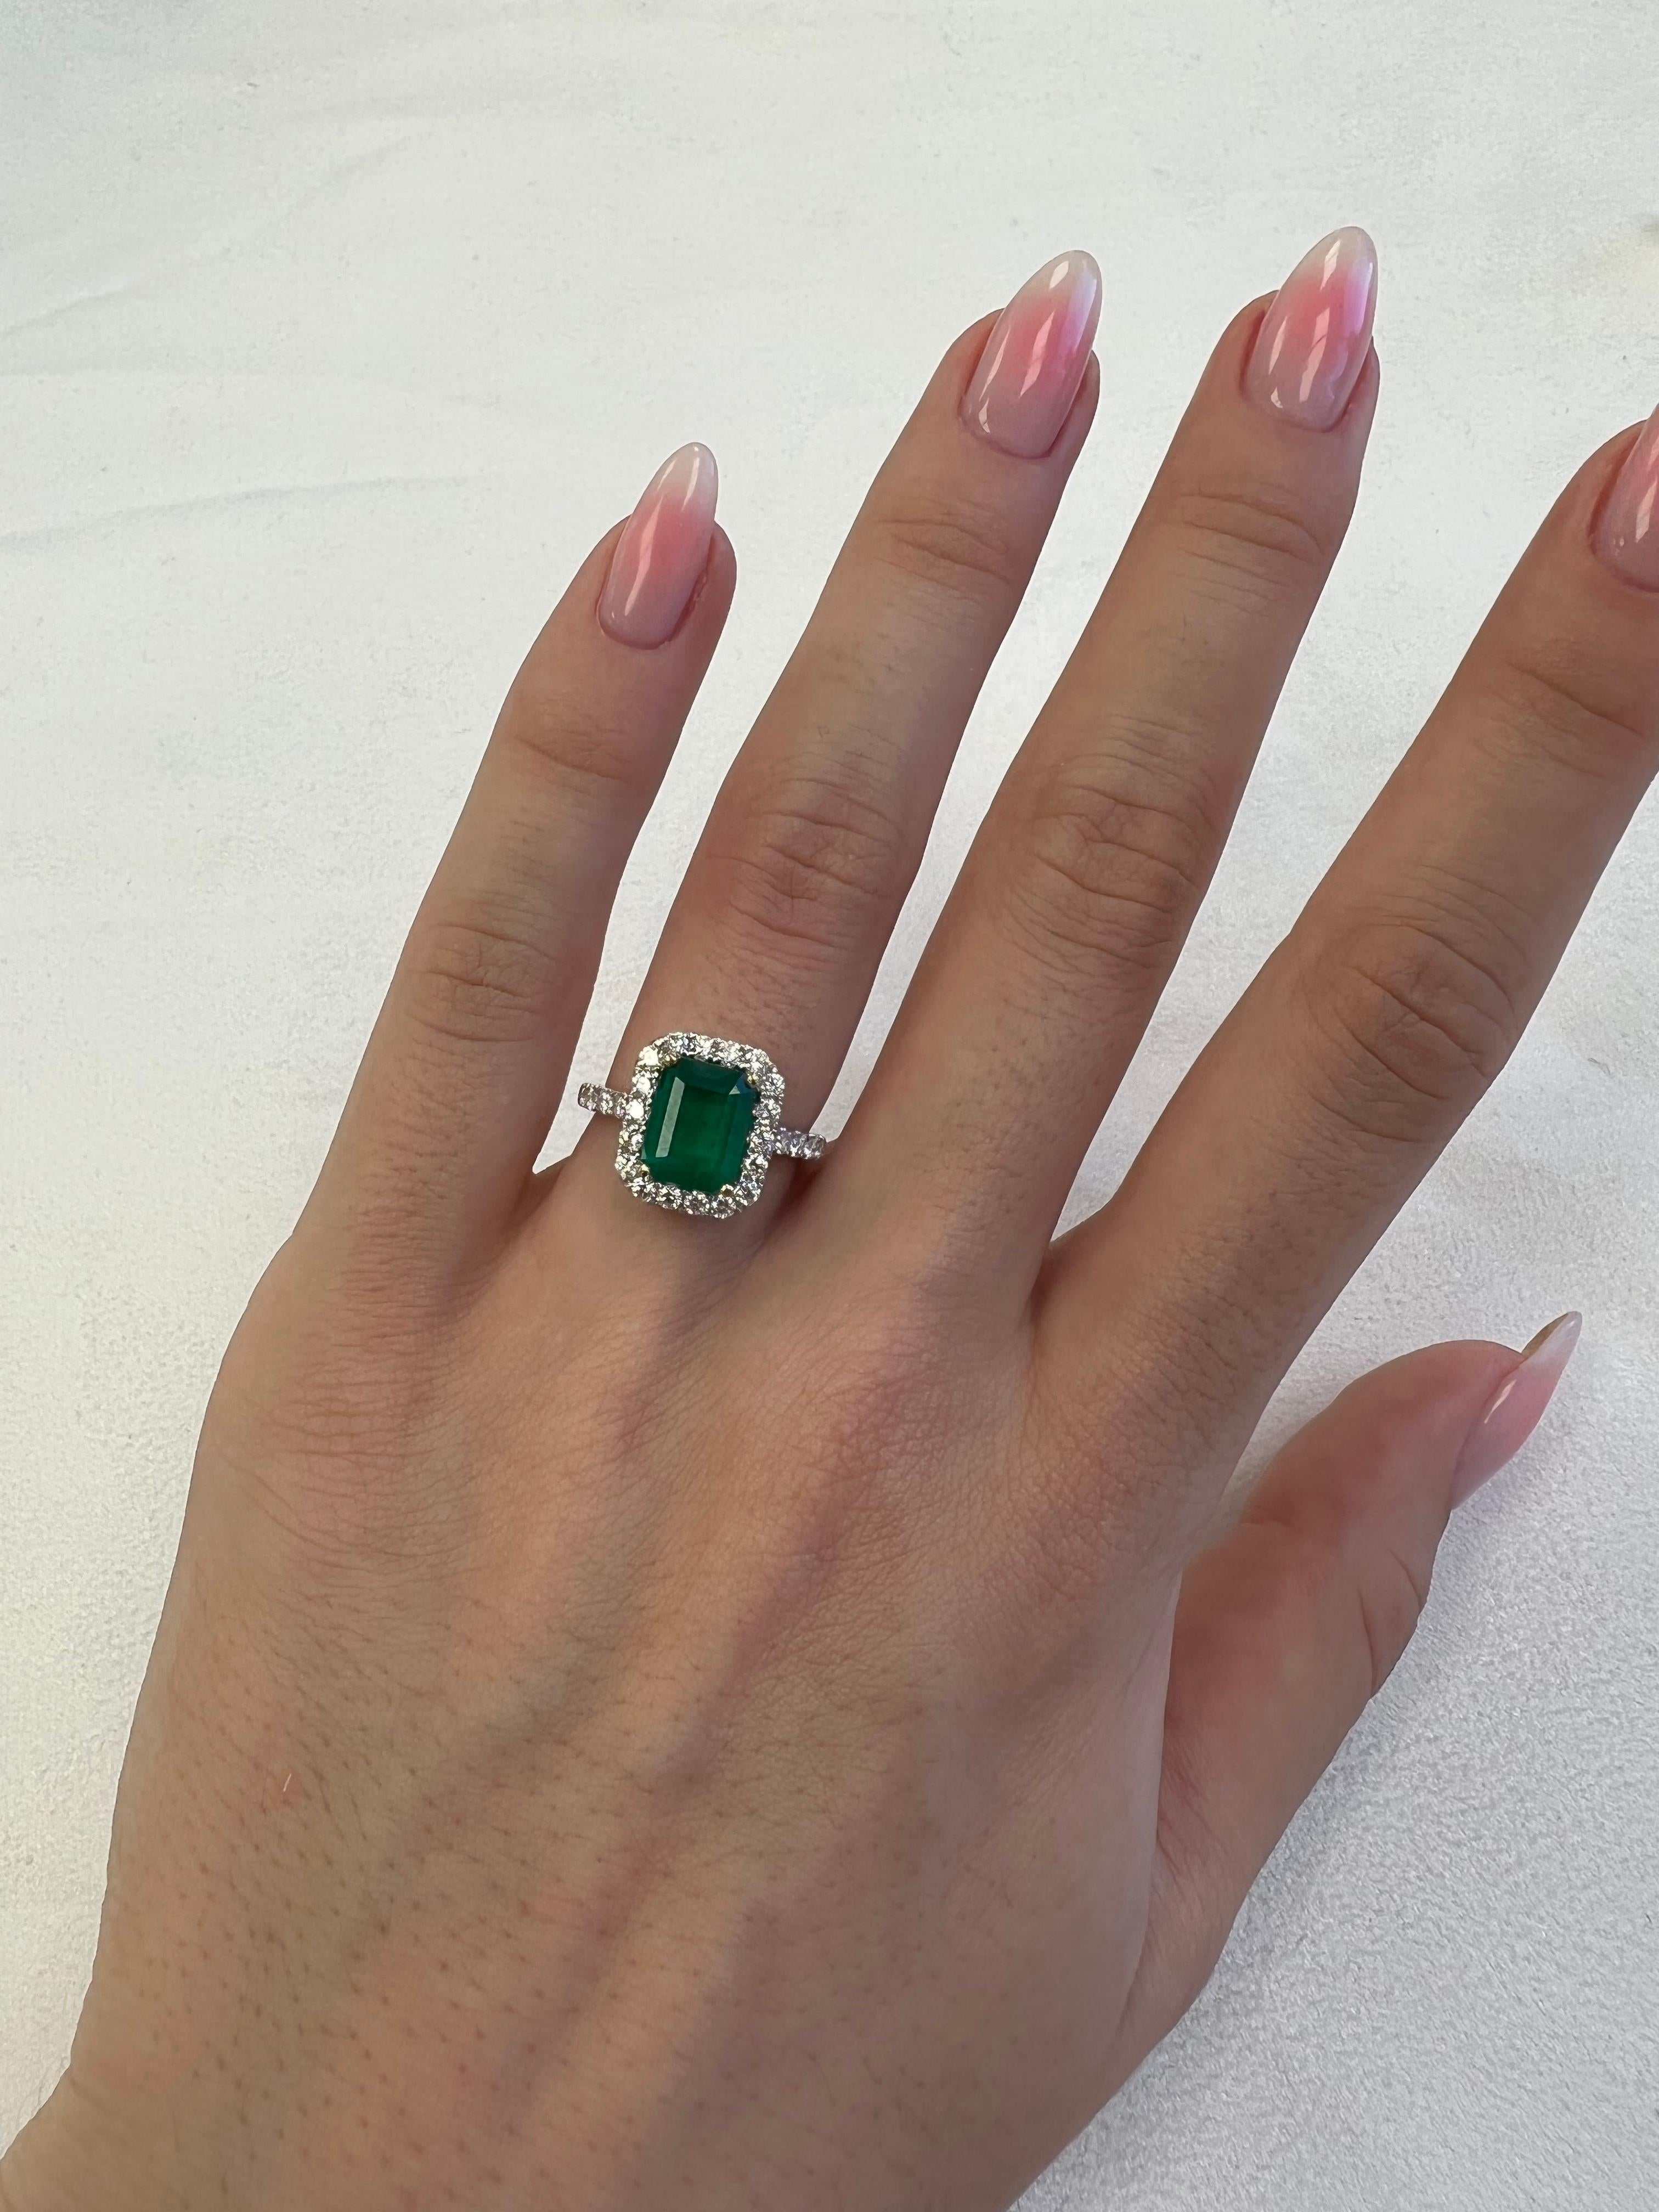 Classic emerald and diamond halo ring, GIA certified. 
2.94 carats total gemstone weight.
2.14 carat emerald cut emerald, F2, GIA certified. Complimented by 30 round brilliant diamonds, 0.80 carats, F/G color and VS clarity. 18k white and yellow